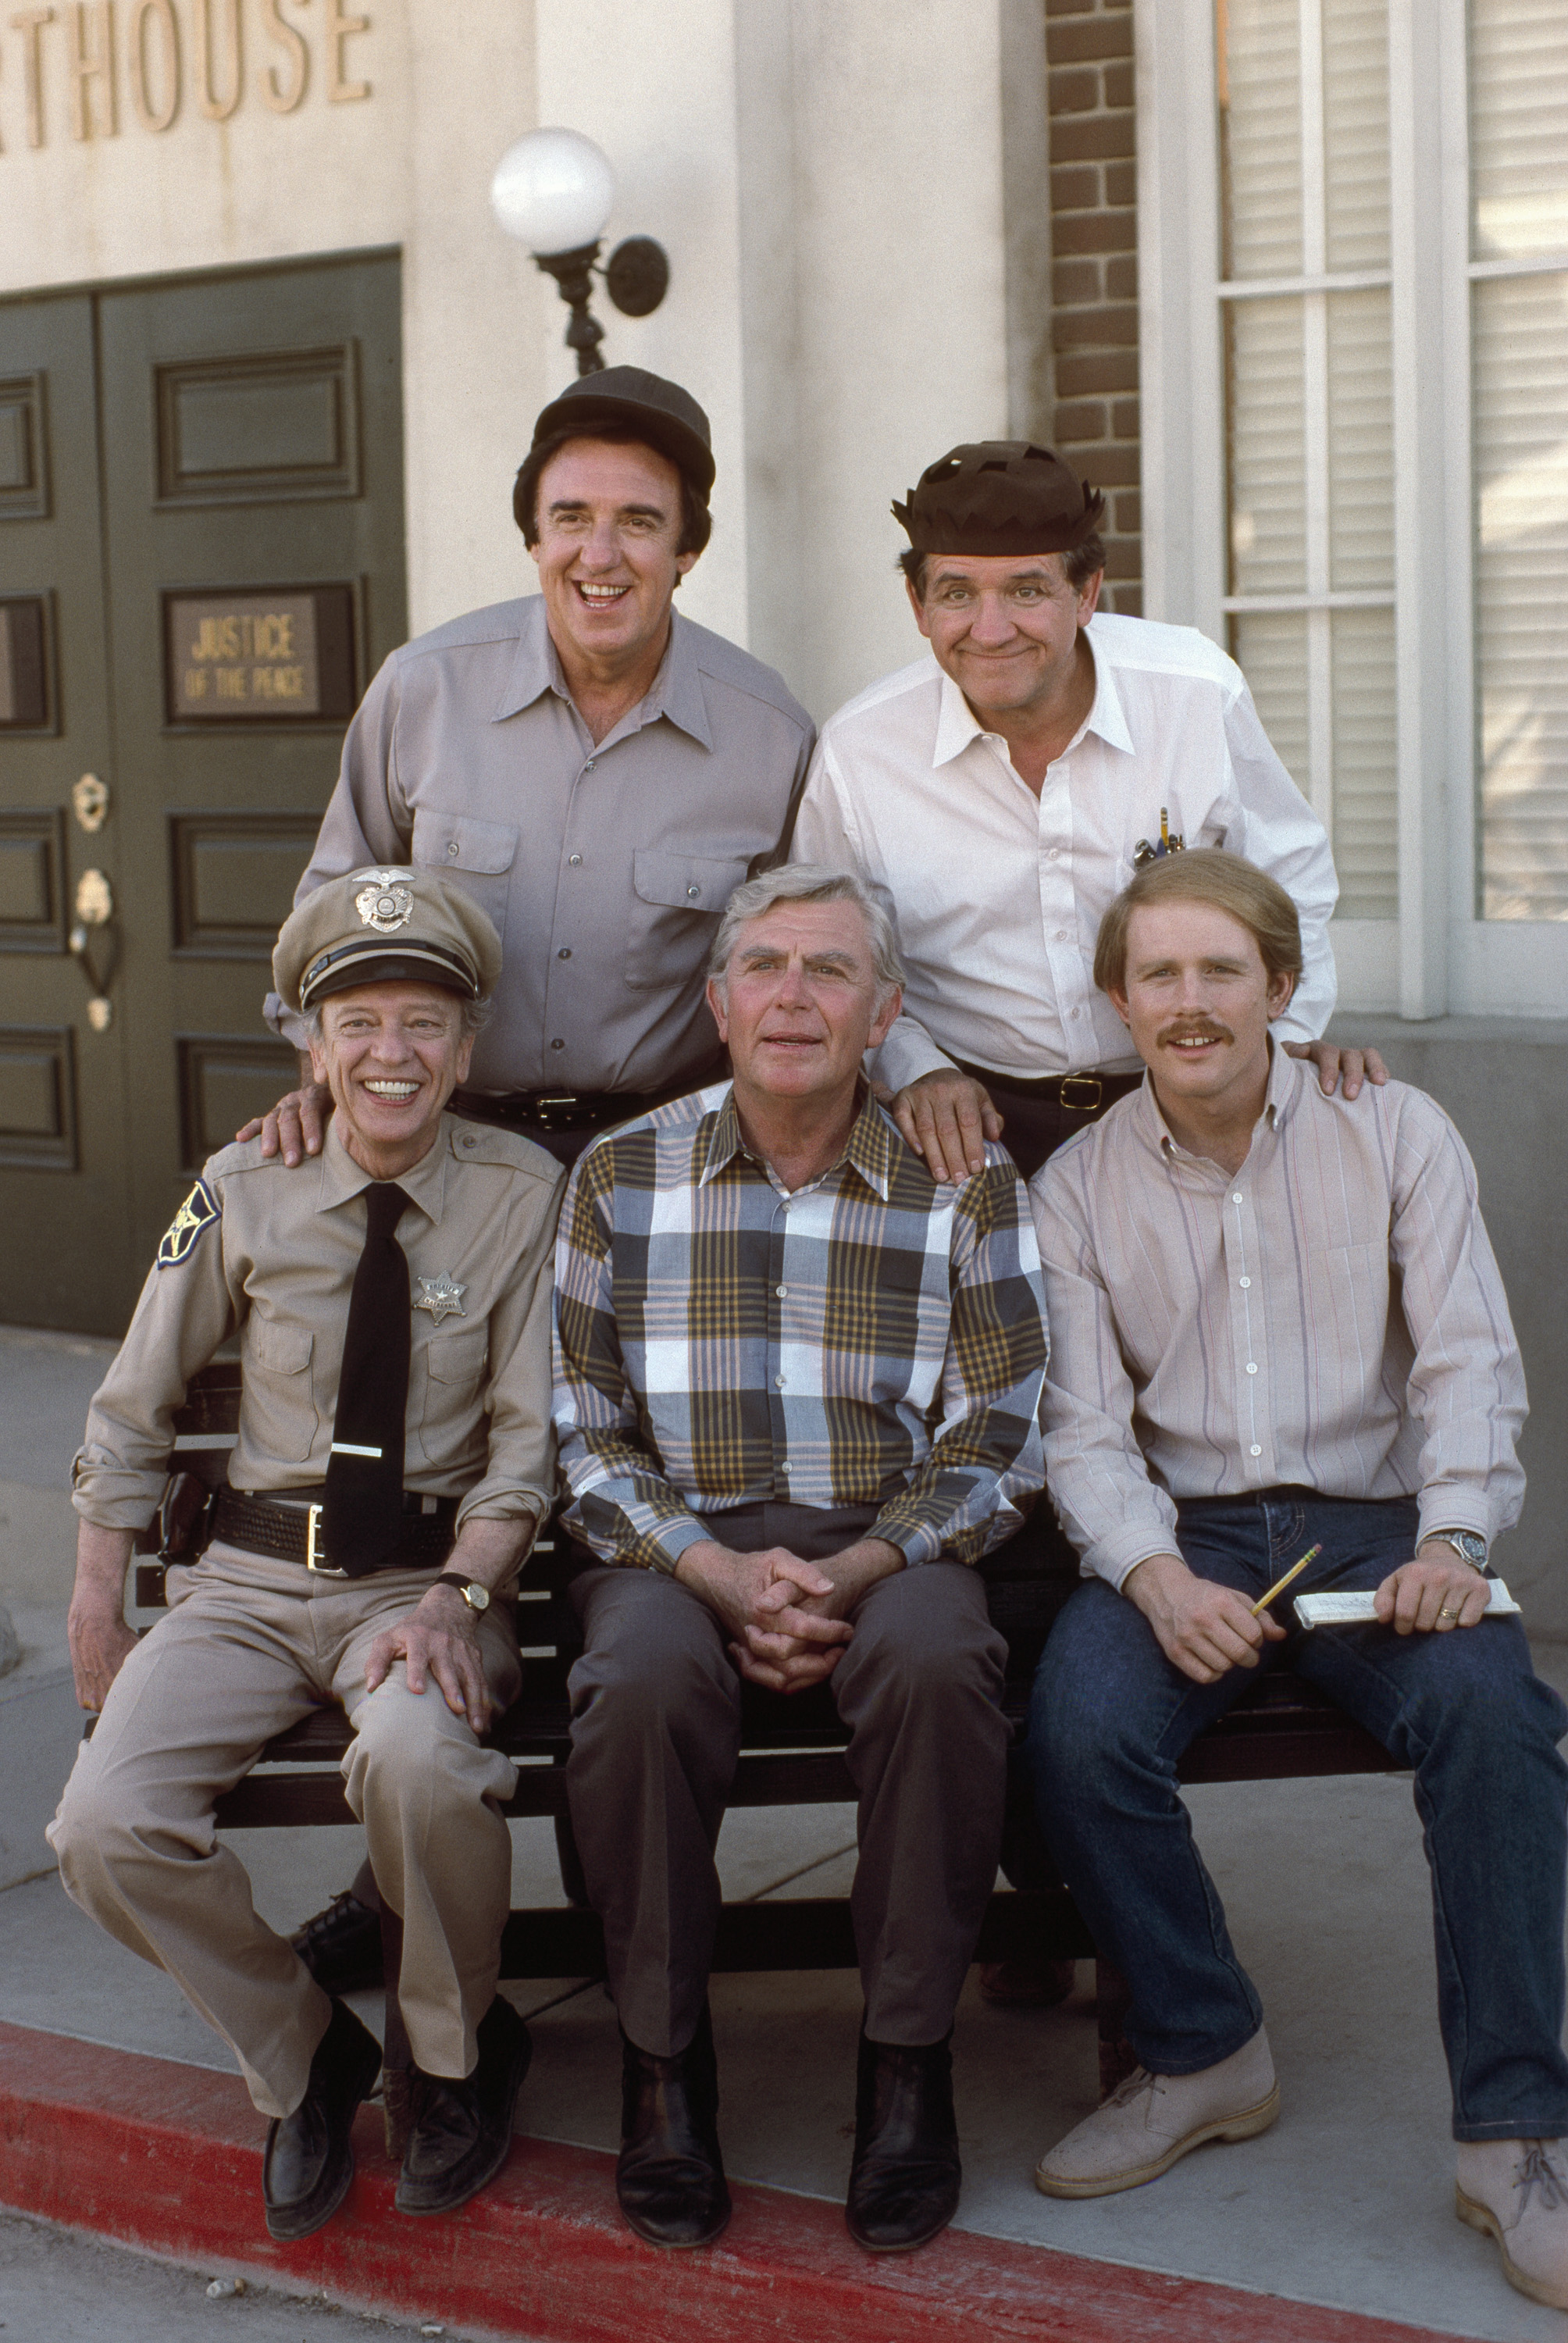 (Back row l-r) Jim Nabors as Gomer Pyle, George Lindsey as Goober Pyle (front row l-r) Don Knotts as Barney Fife, Andy Griffith as Andy Taylor, Ron Howard as Opie Taylor in 'Return to Mayberry'